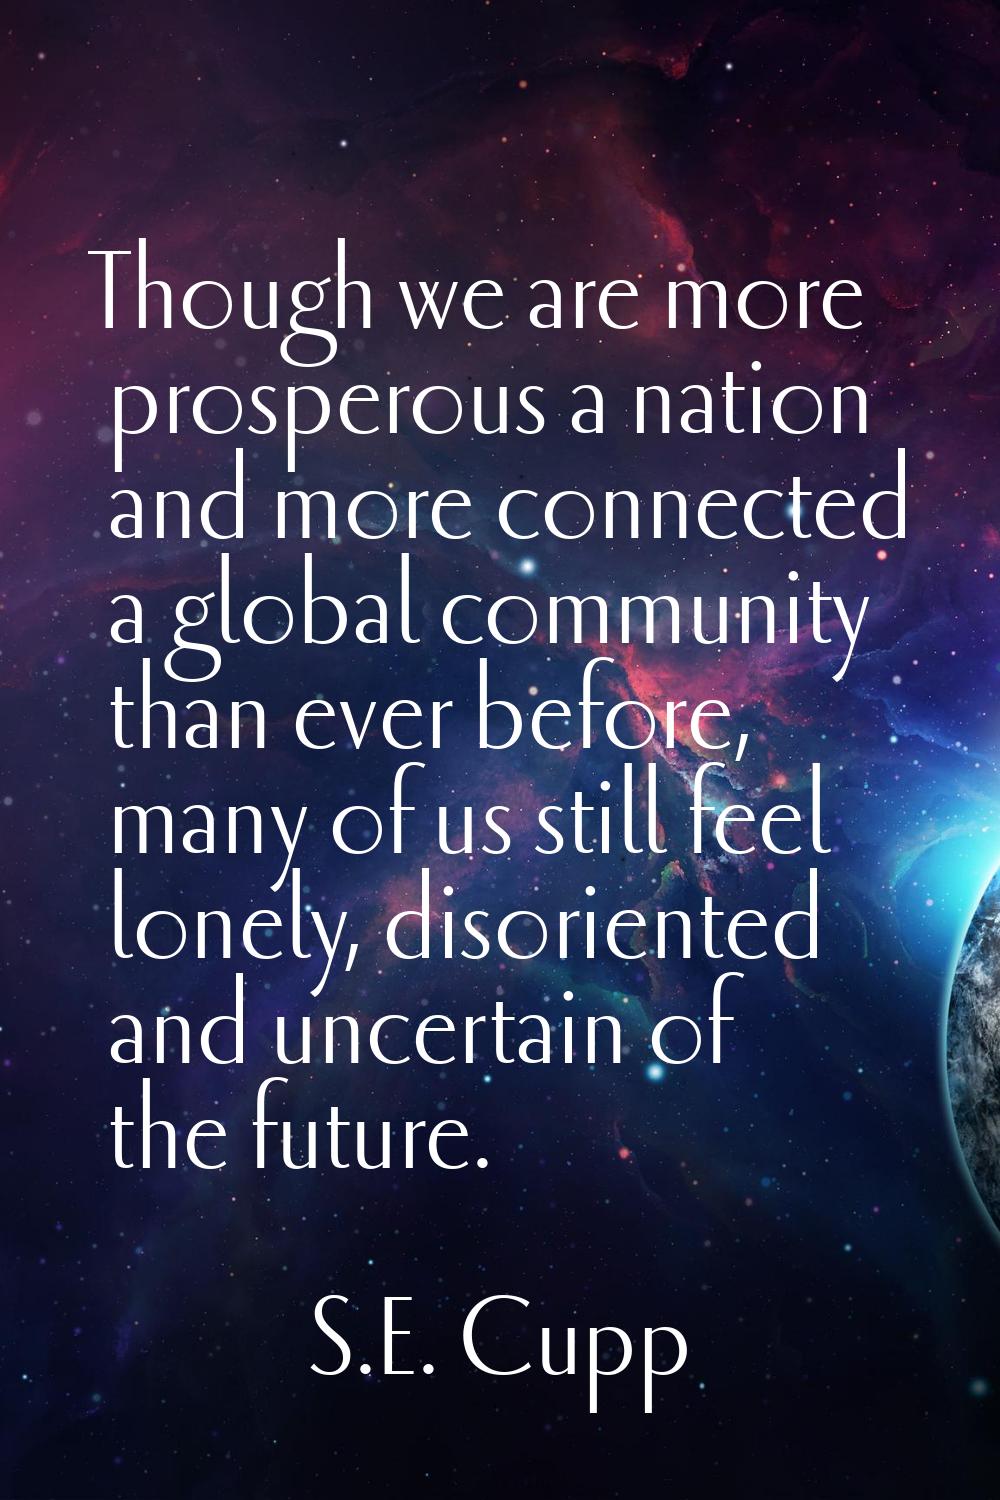 Though we are more prosperous a nation and more connected a global community than ever before, many